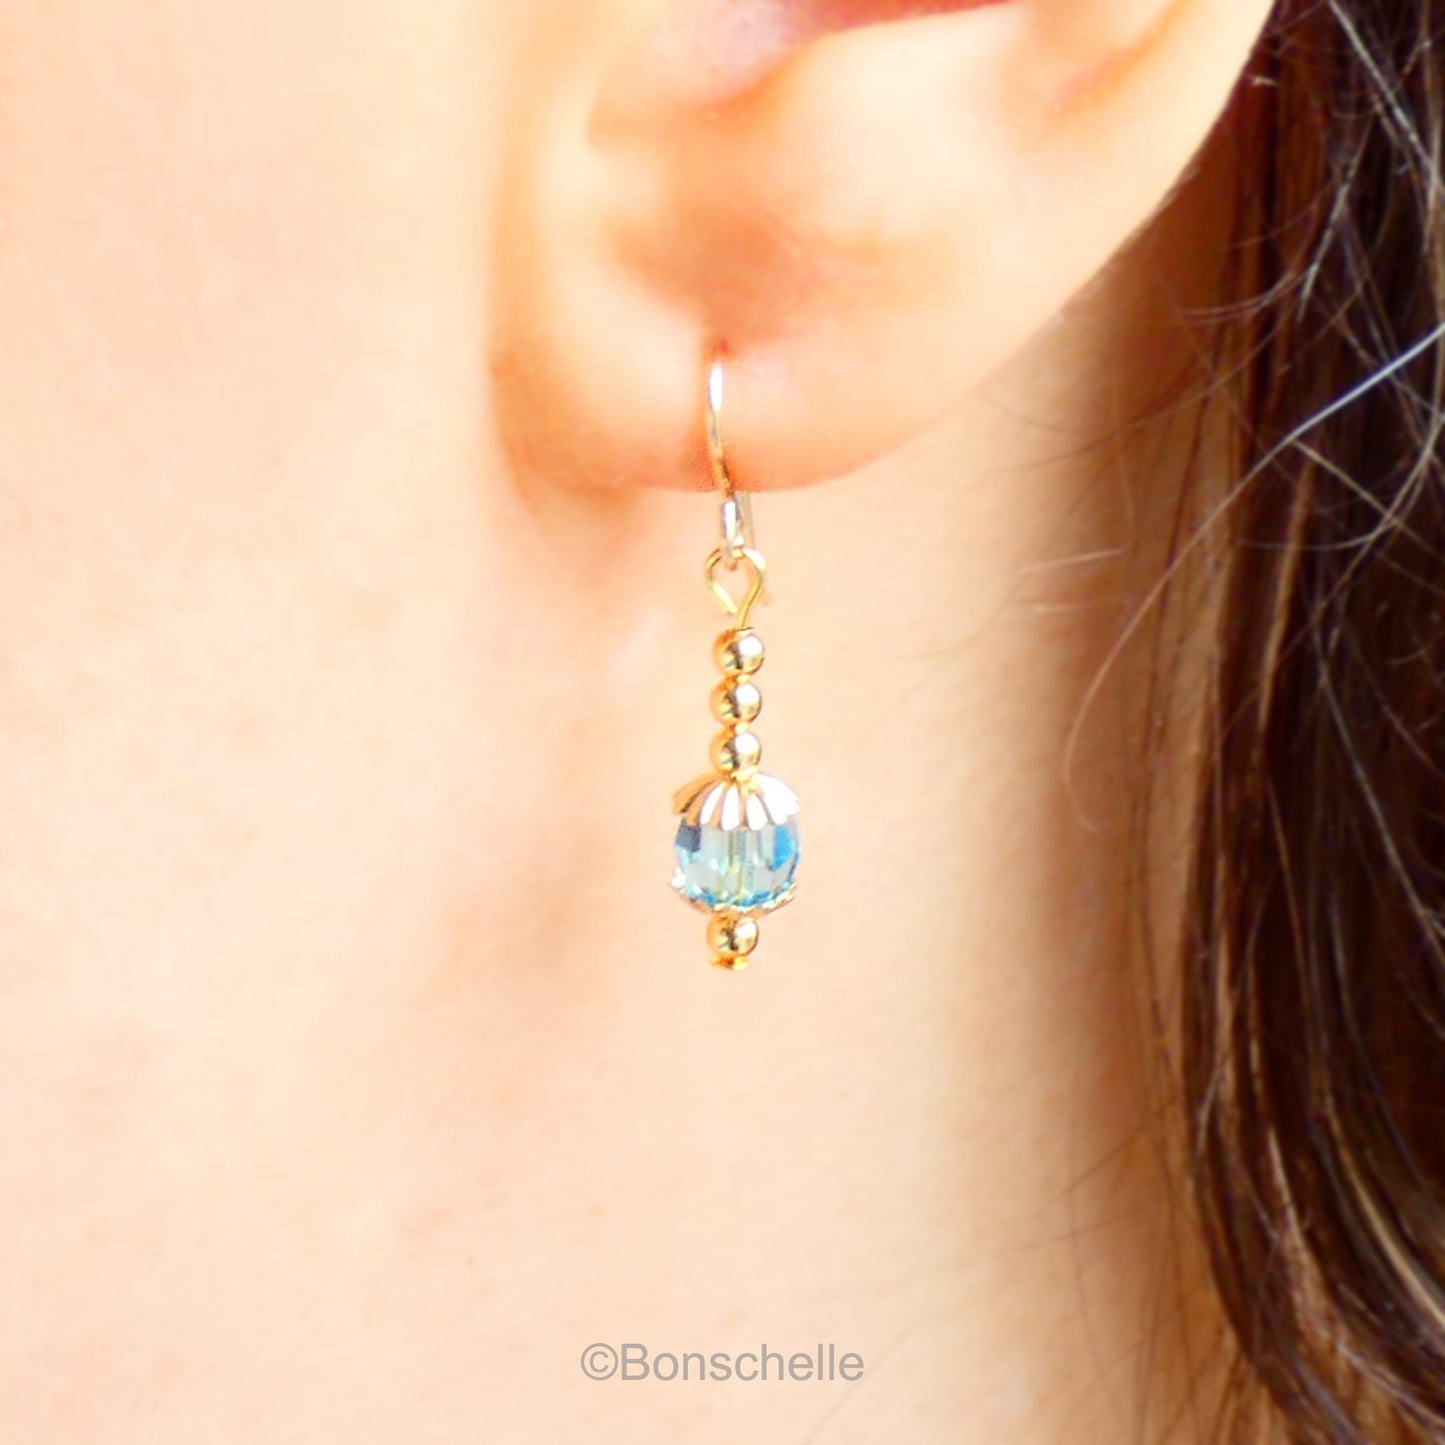 Handmade dangle earrings made with turquoise coloured Swarovski cut glass crystal faceted beads, small gold toned beads and 14K gold filled earwires shown being worn.